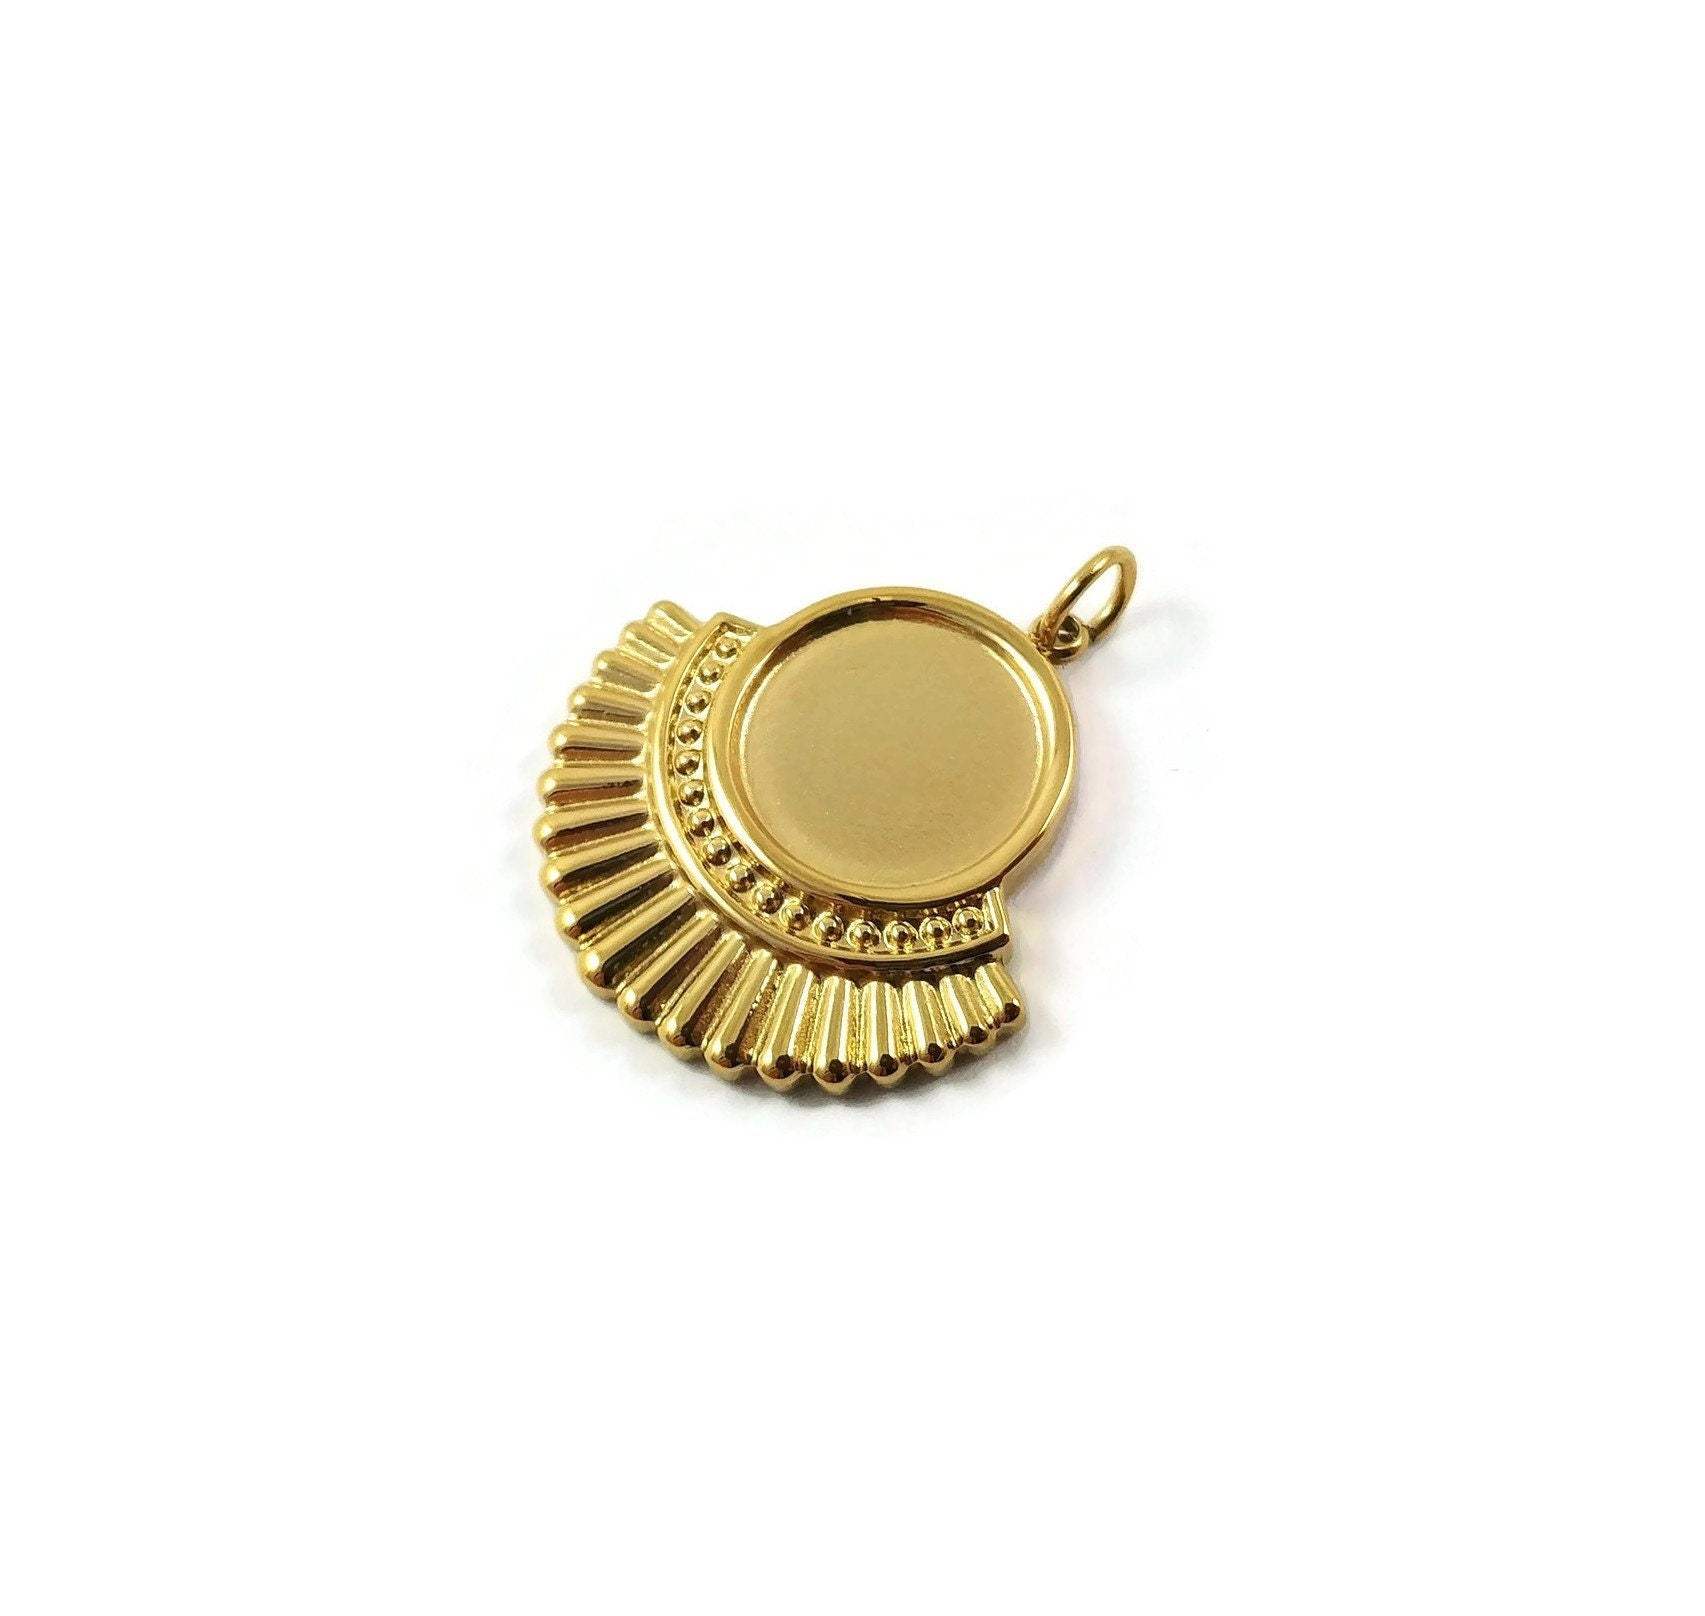 14K gold plated pendant, Stainless steel cabochon setting, Jewelry making supplies